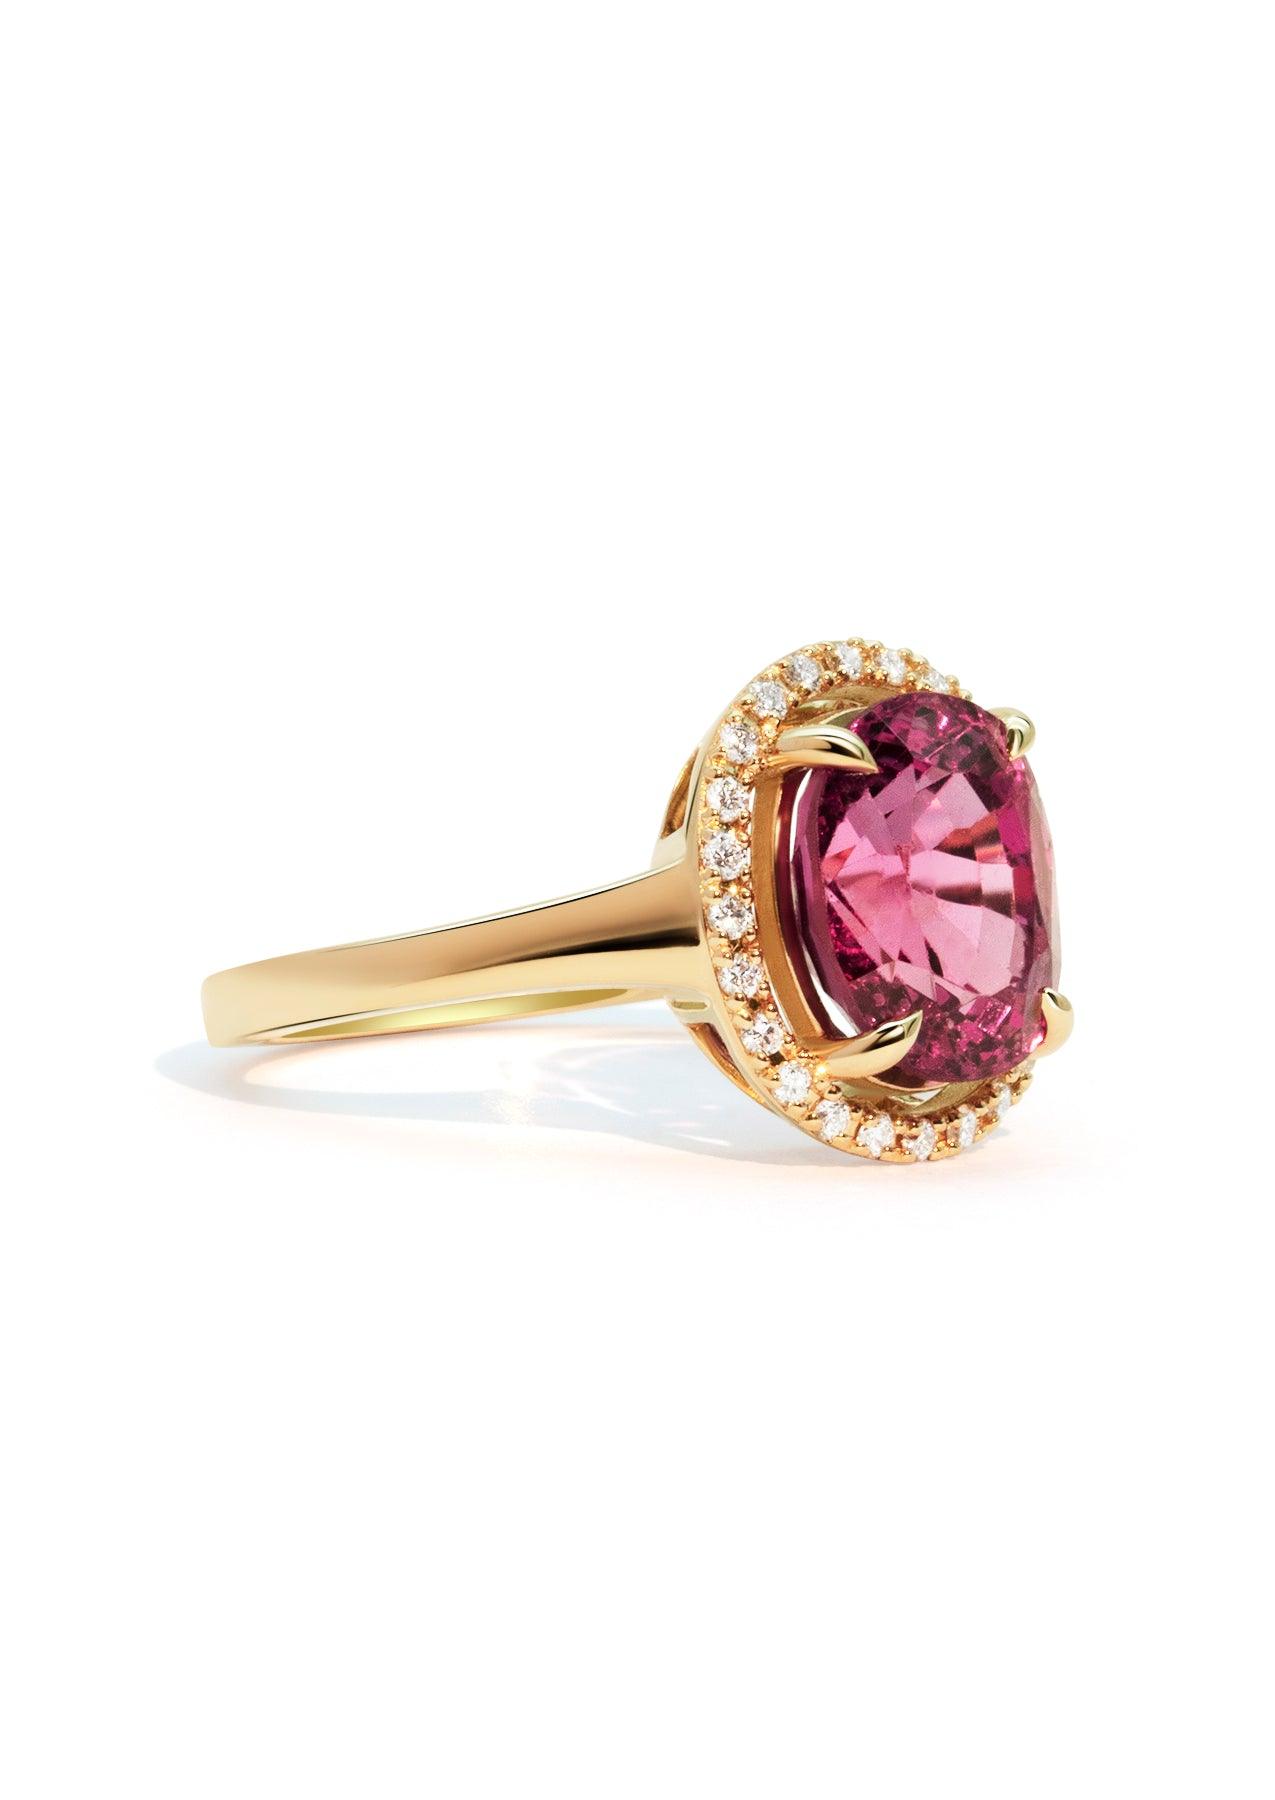 The Iris 4.4ct Spinel Ring